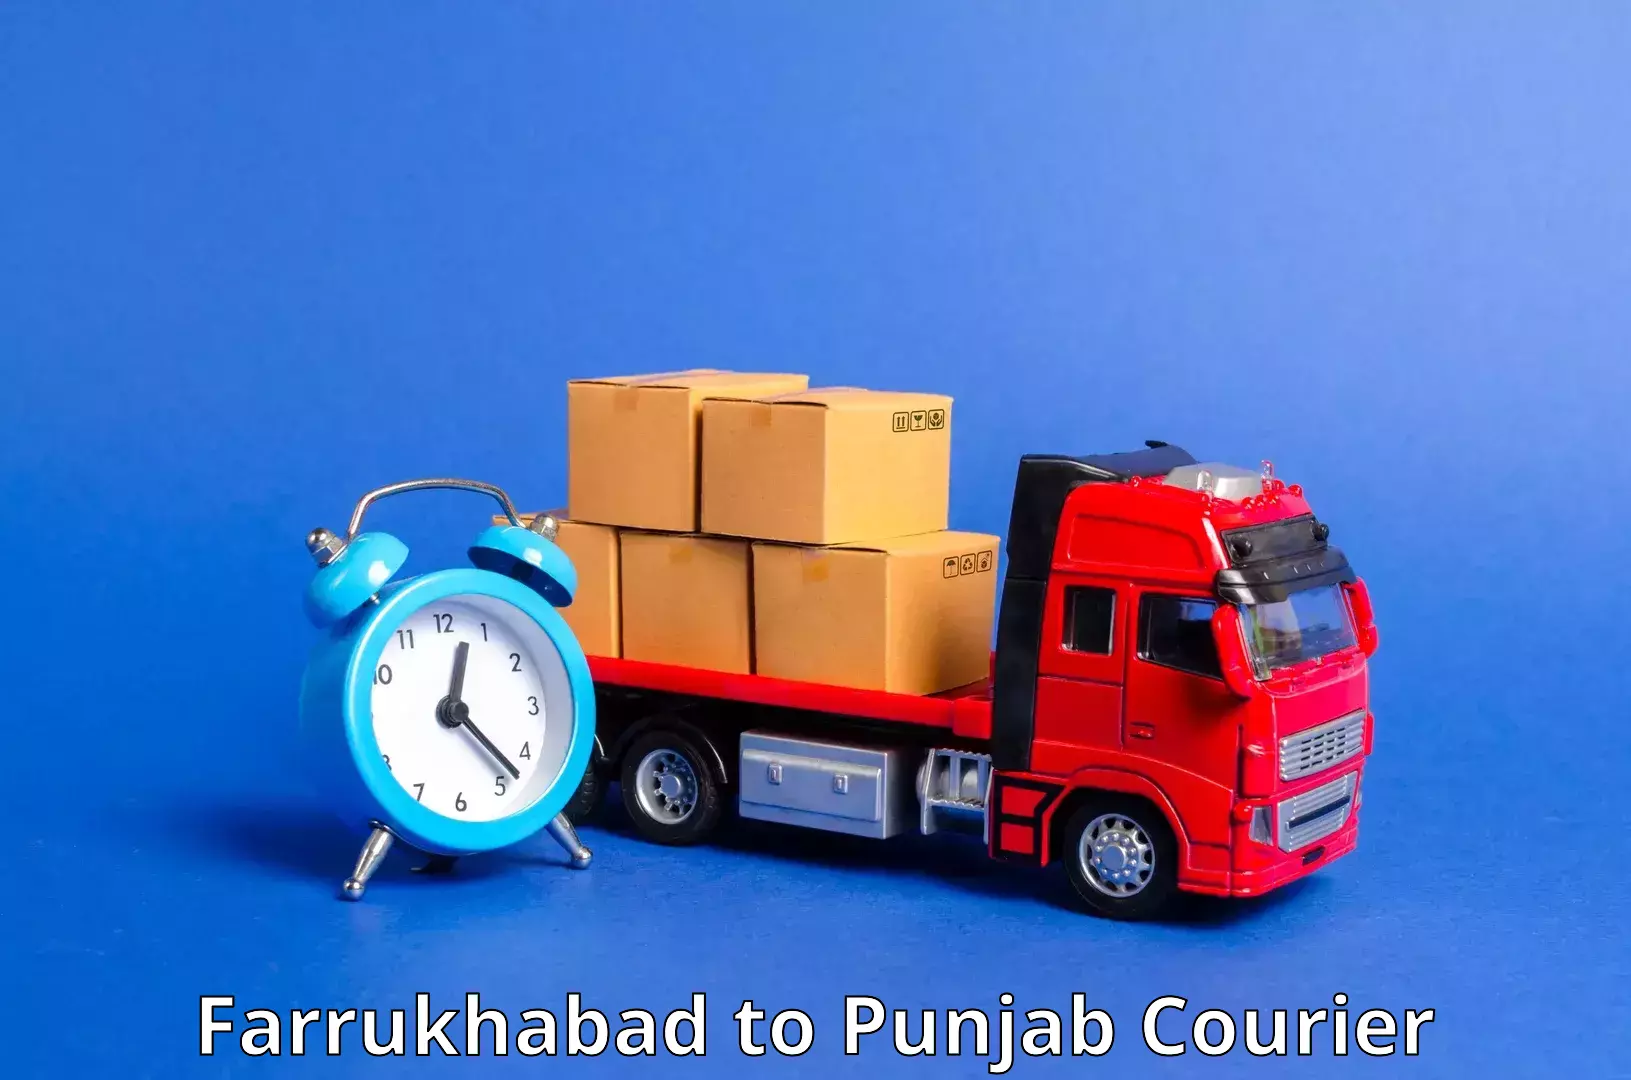 Next day courier Farrukhabad to Amritsar